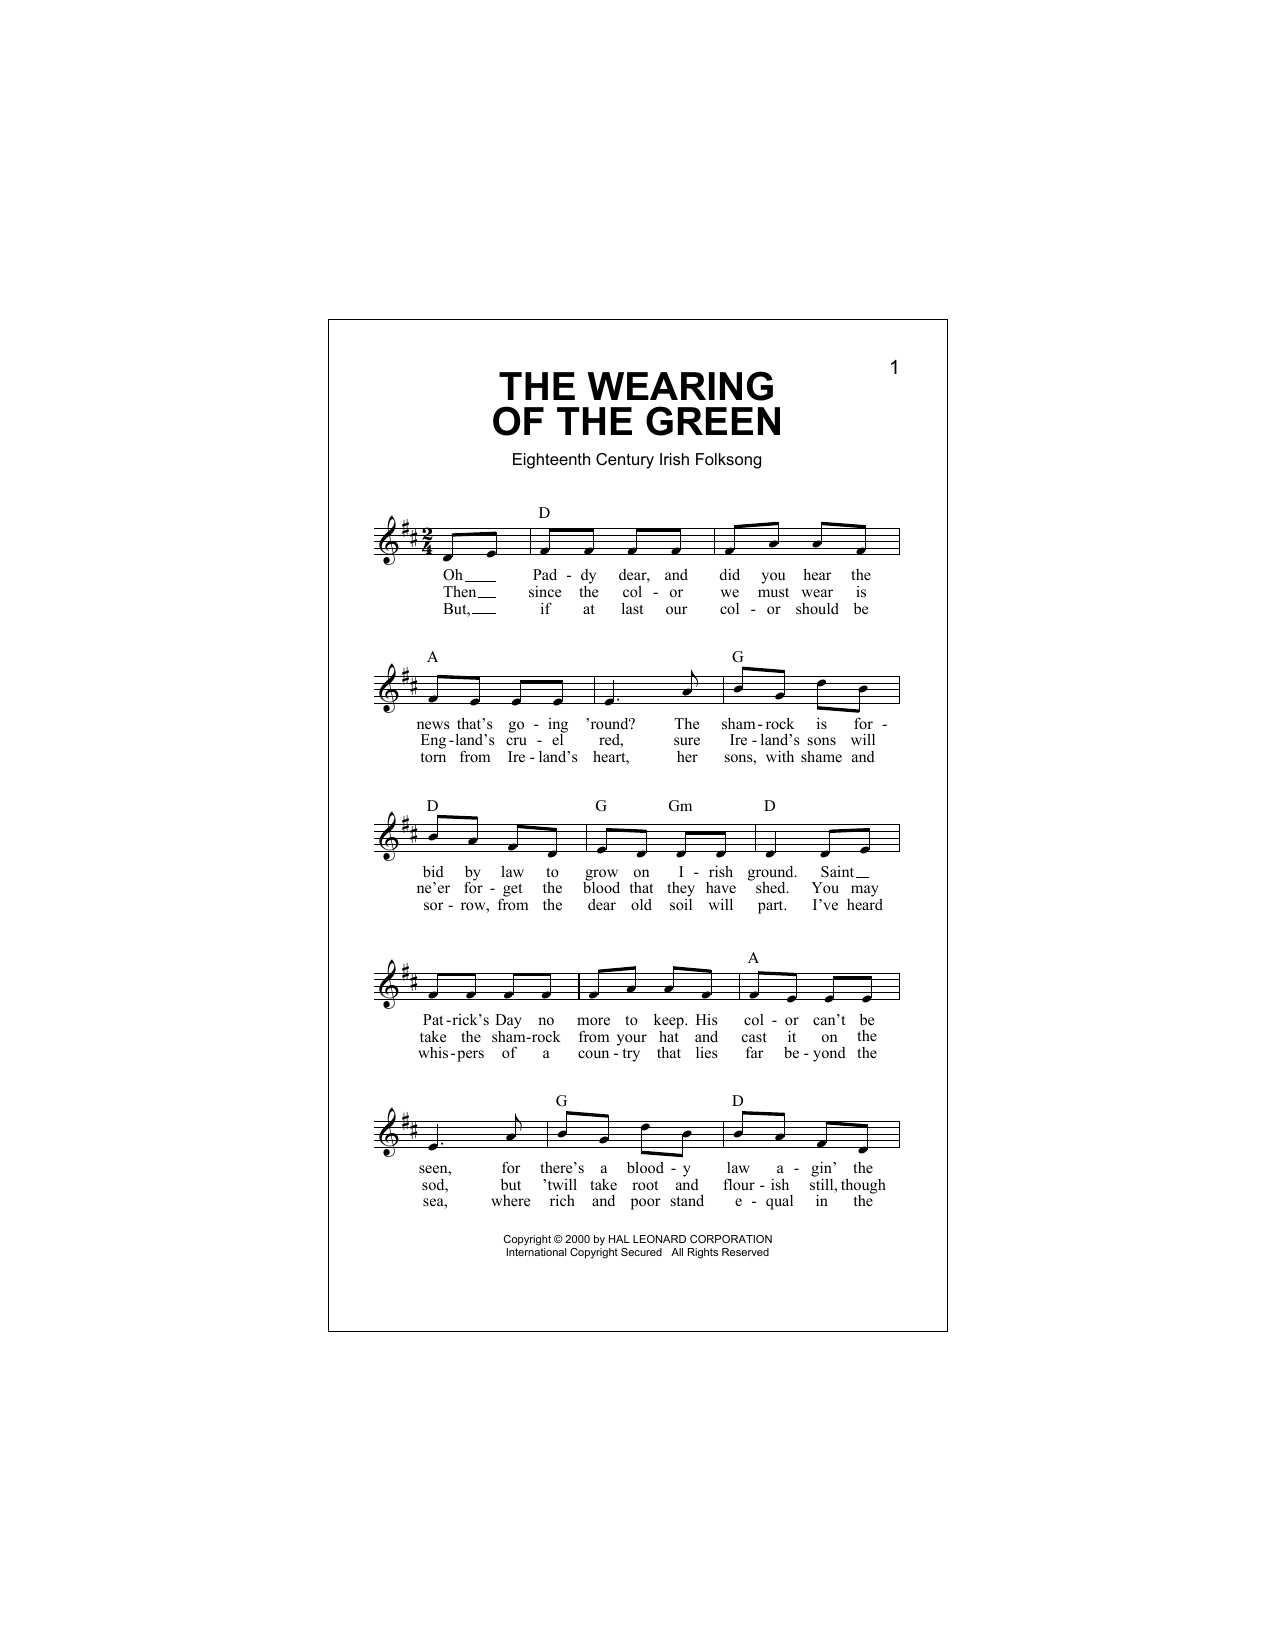 Download Irish Folksong The Wearing Of The Green Sheet Music